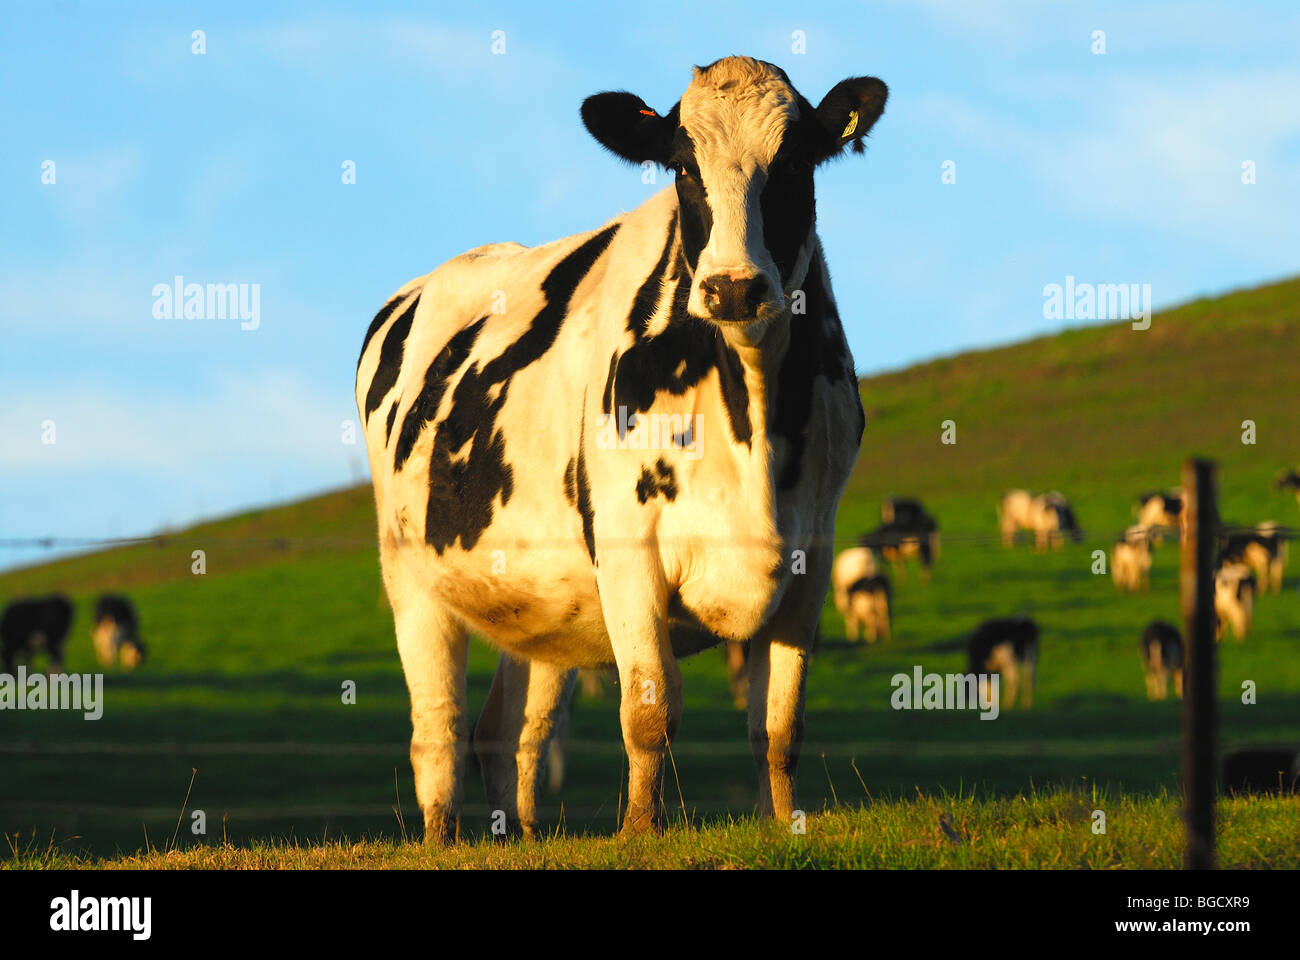 a black and white cow in a green hill field with  herd in background and a blue sky Stock Photo